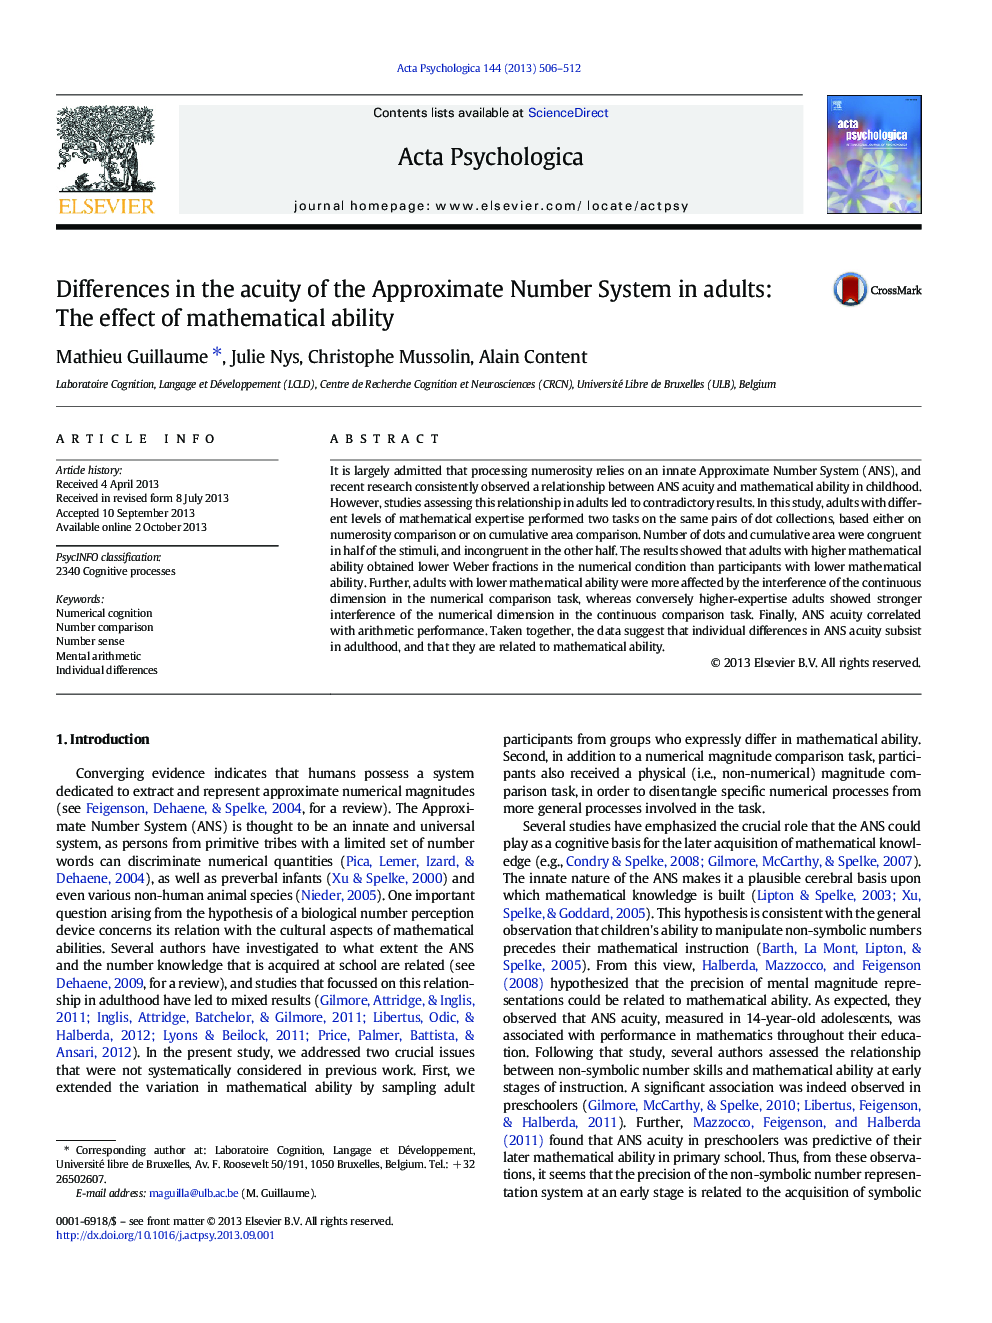 Differences in the acuity of the Approximate Number System in adults: The effect of mathematical ability